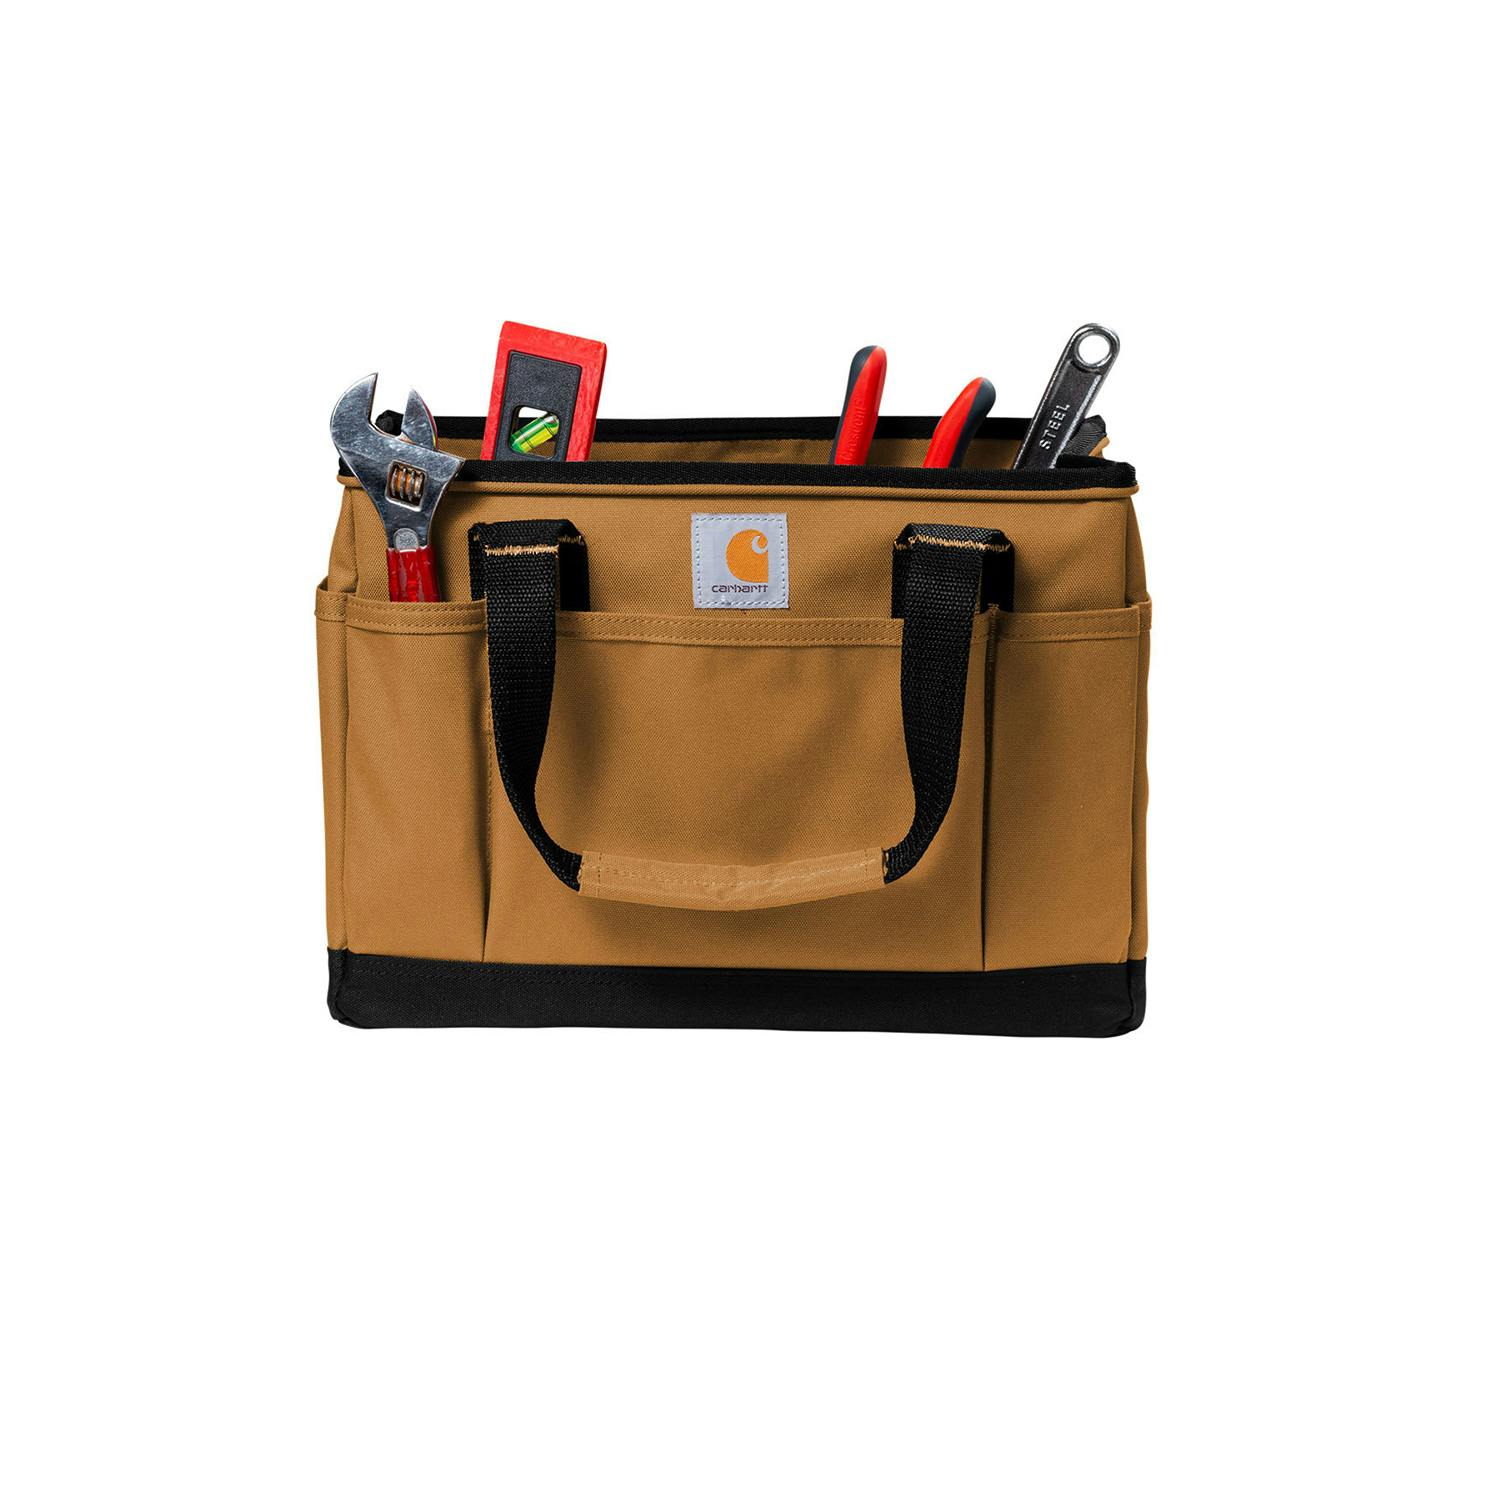 Carhartt Utility Tote Bag - additional Image 3